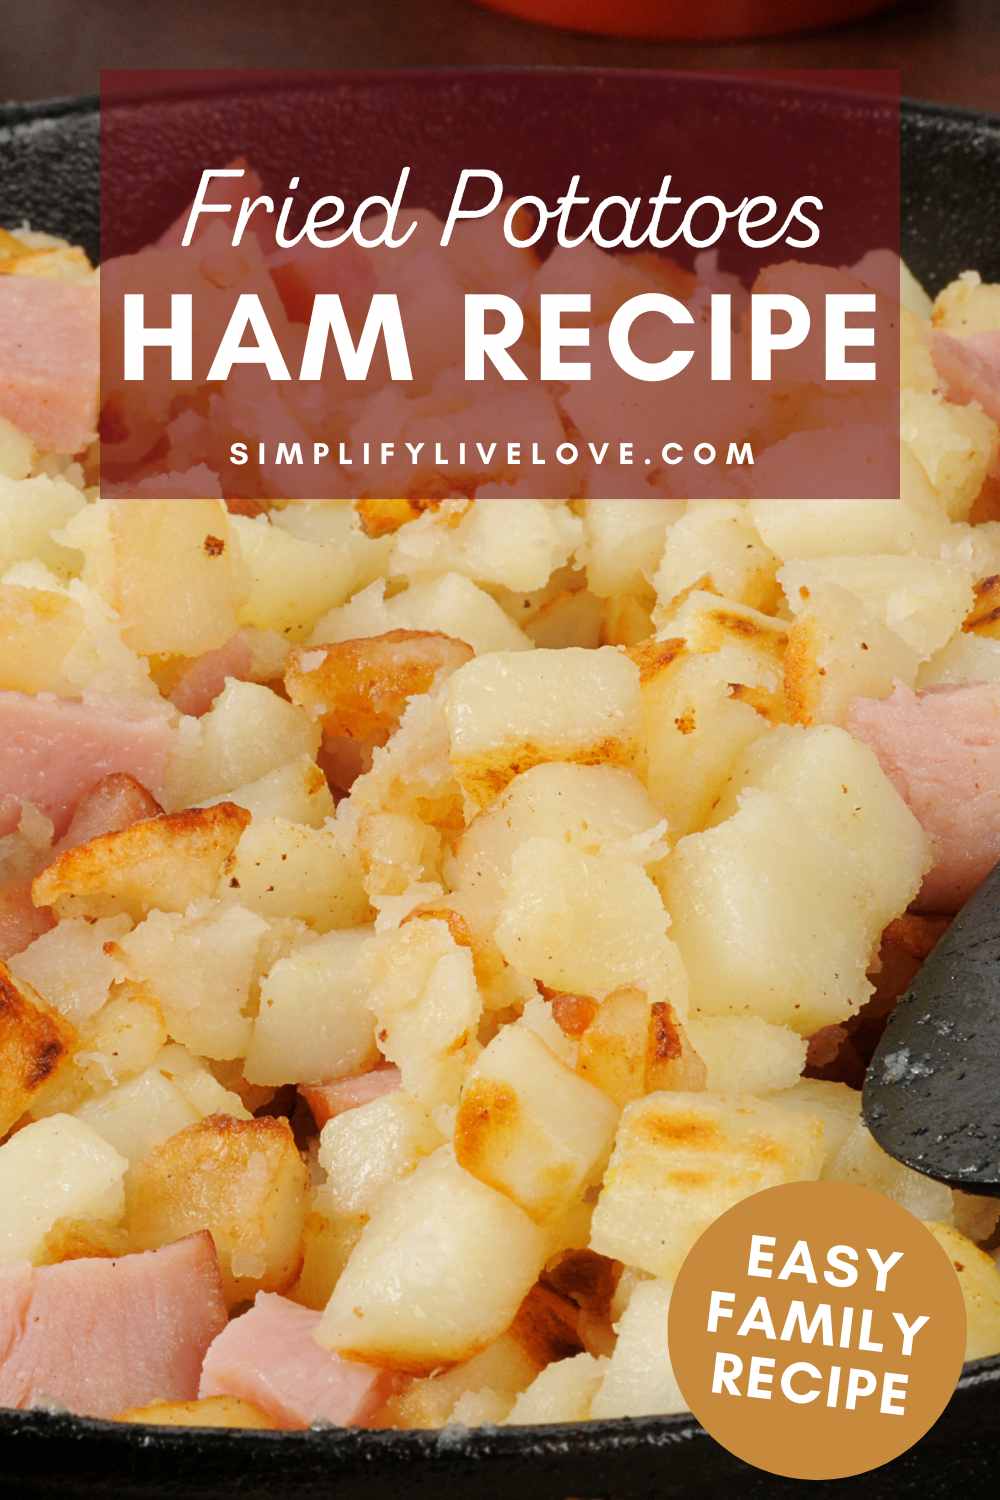 Fried Potatoes and Ham Recipe - A Family Favorite - Simplify, Live, Love